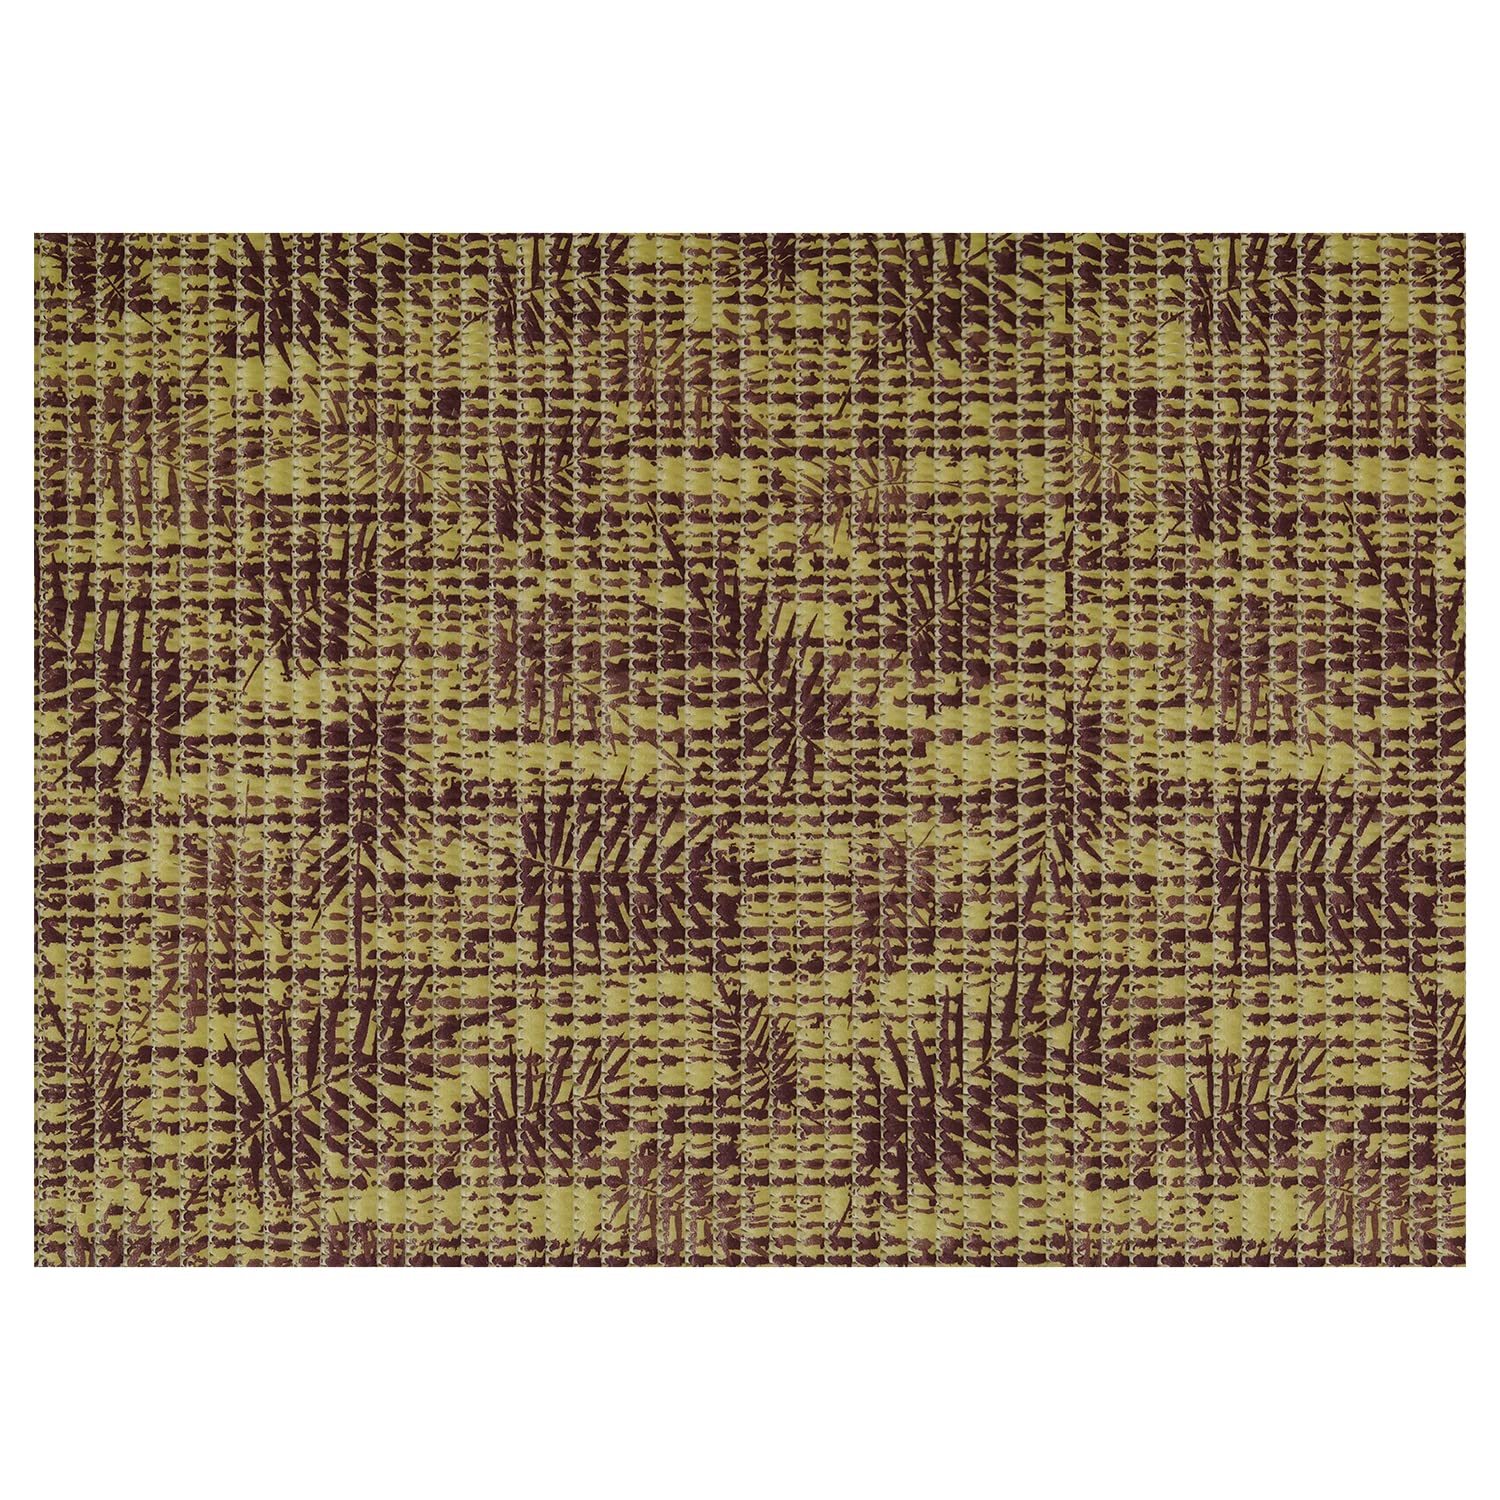 Primary image for Dundee Deco Leaf Bathroom Mat - 35" x 26" Beige Waterproof Non-Slip Quick Dry Ru